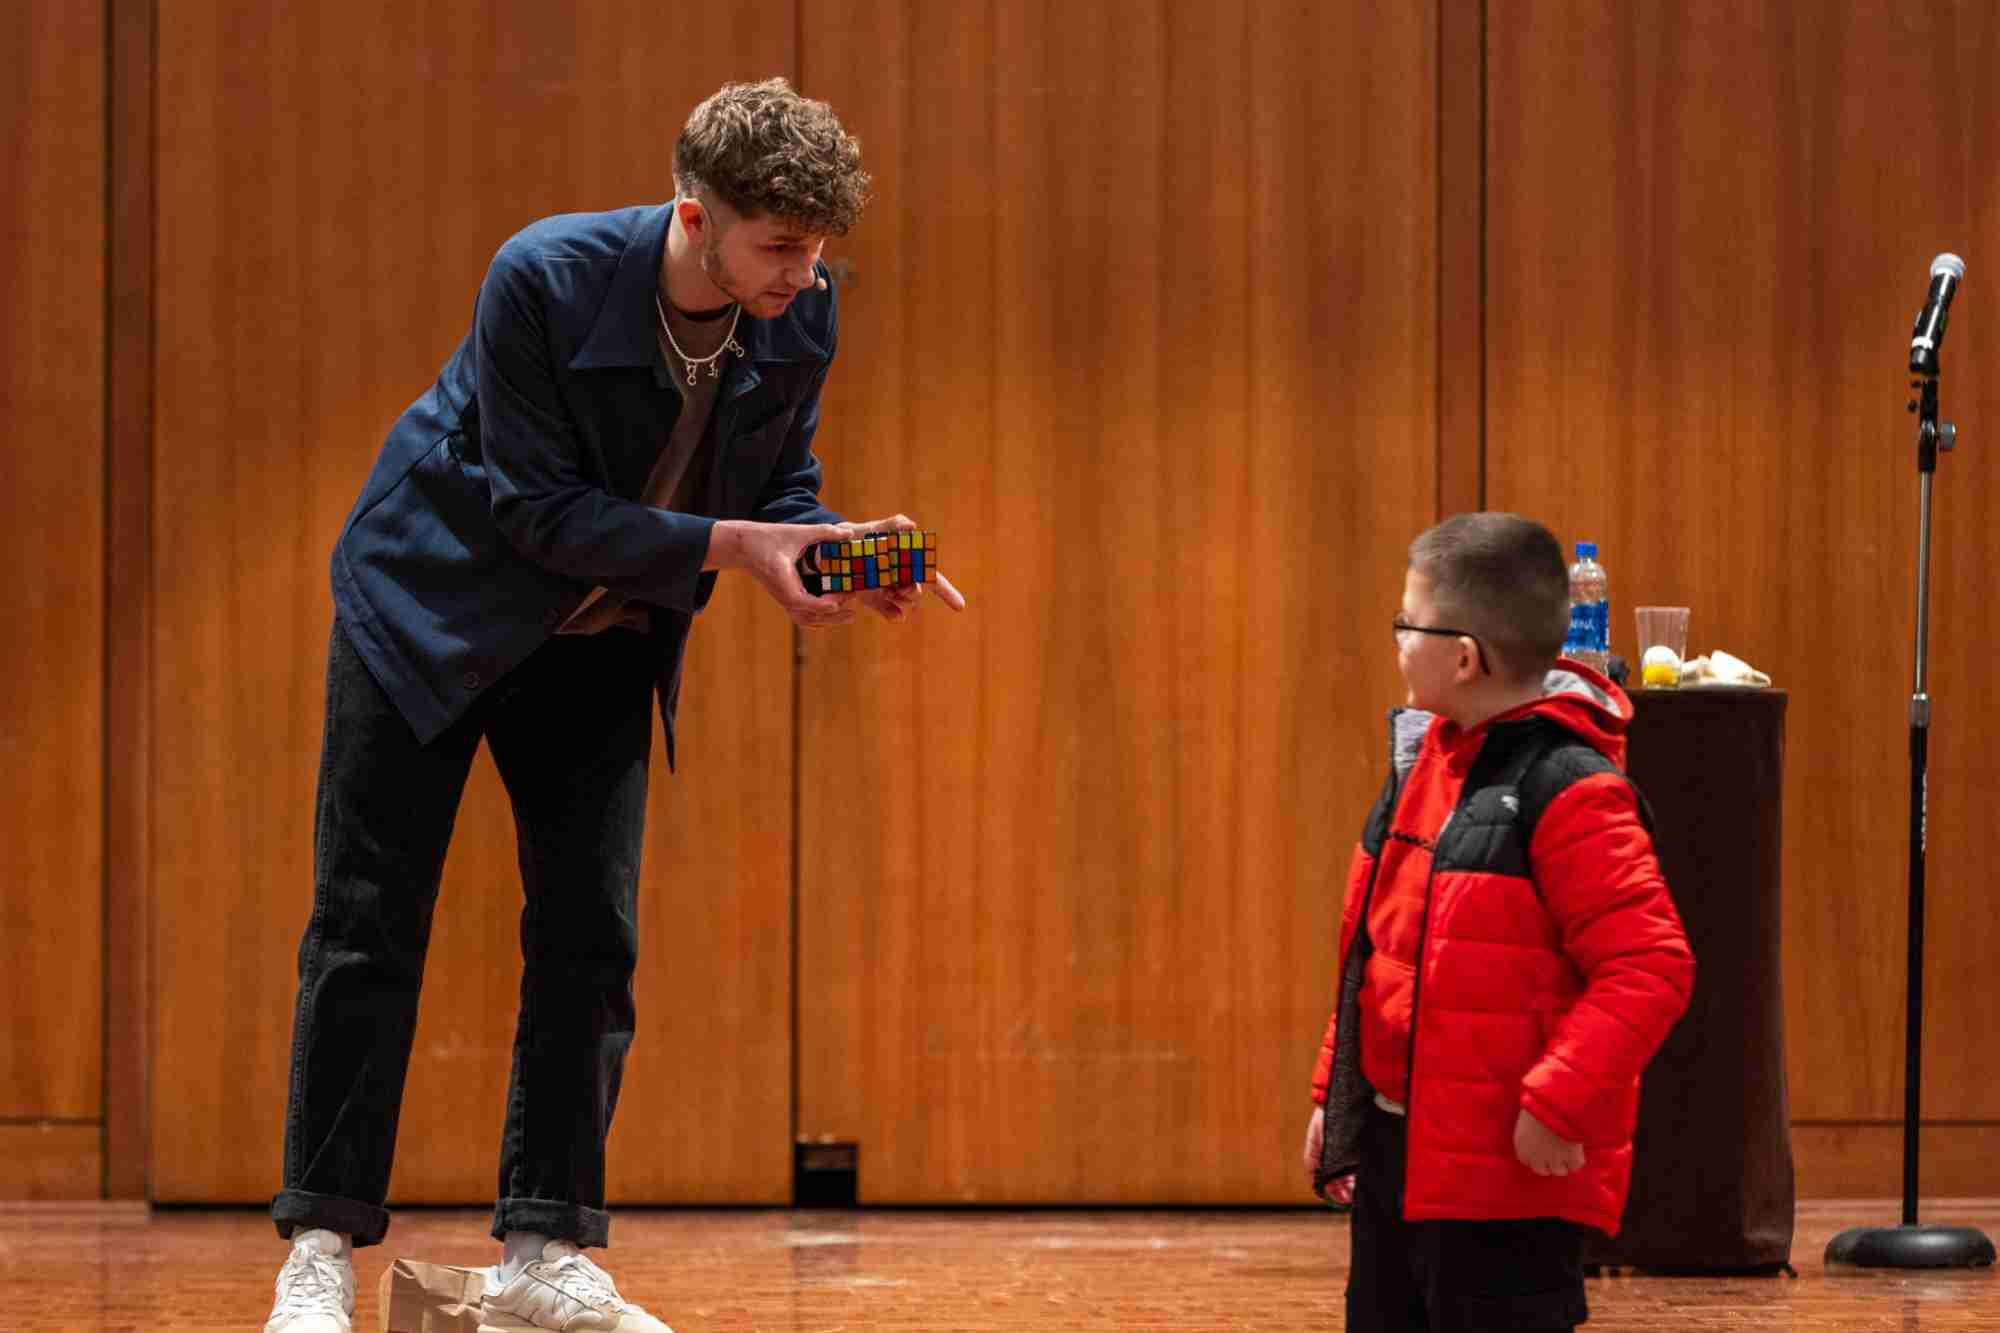 A performer holding a Rubiks Cube chats with a curious kid wearing a red coat